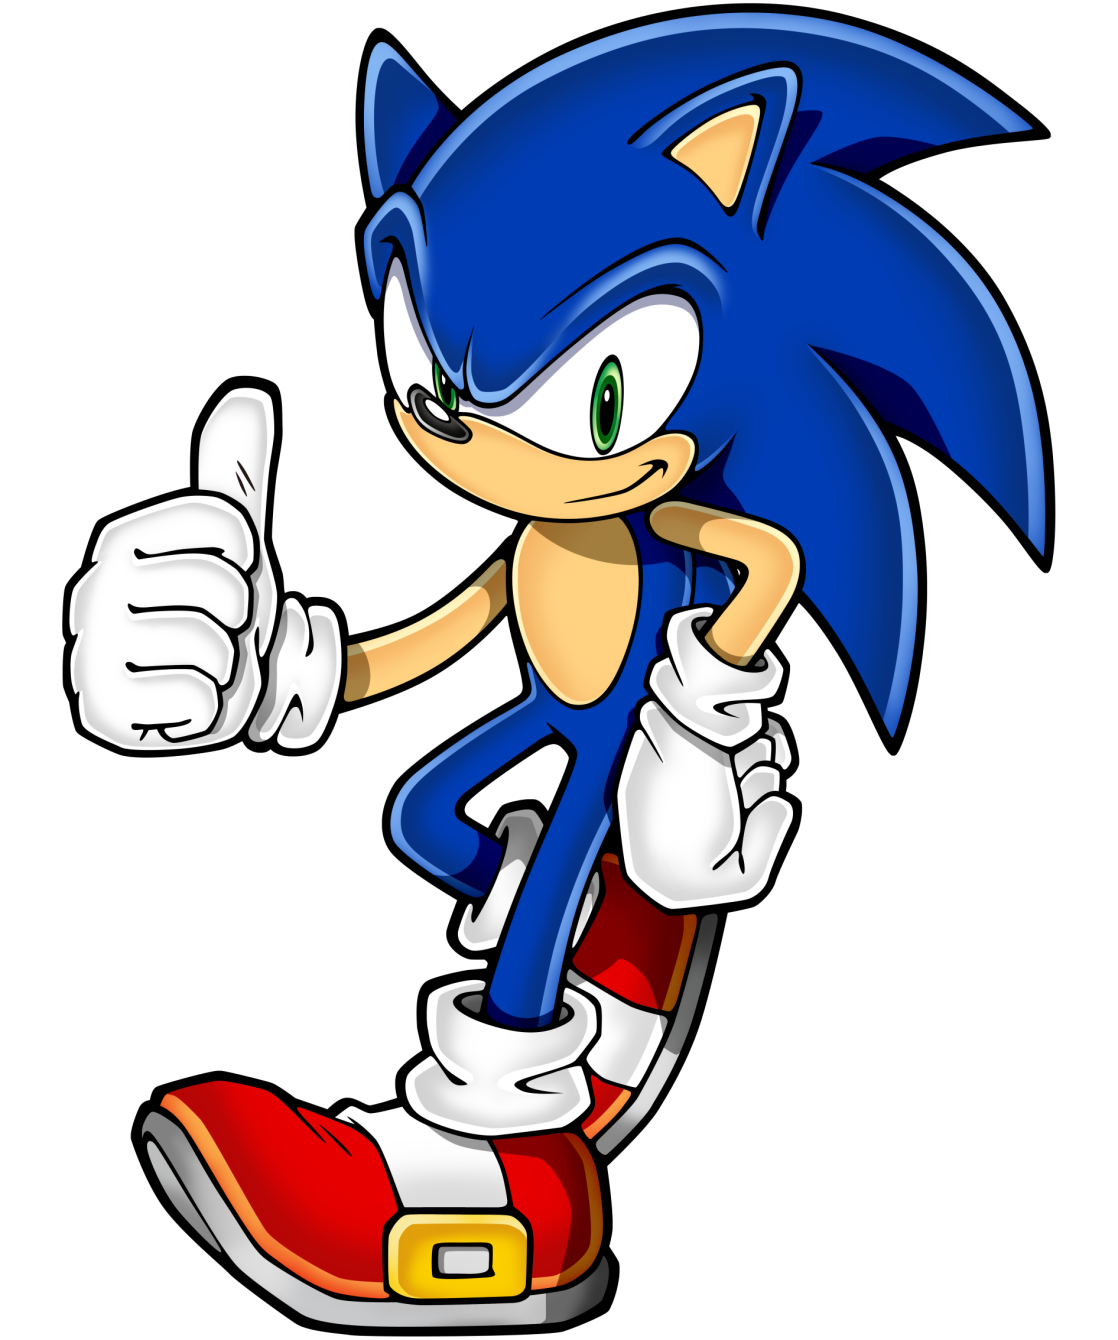 https://static.wikia.nocookie.net/my-sonic-the-hedgehog-headcanon/images/c/cf/Sonic_the_Hedgehog_%28Official_Image%29.png/revision/latest?cb=20150928190143